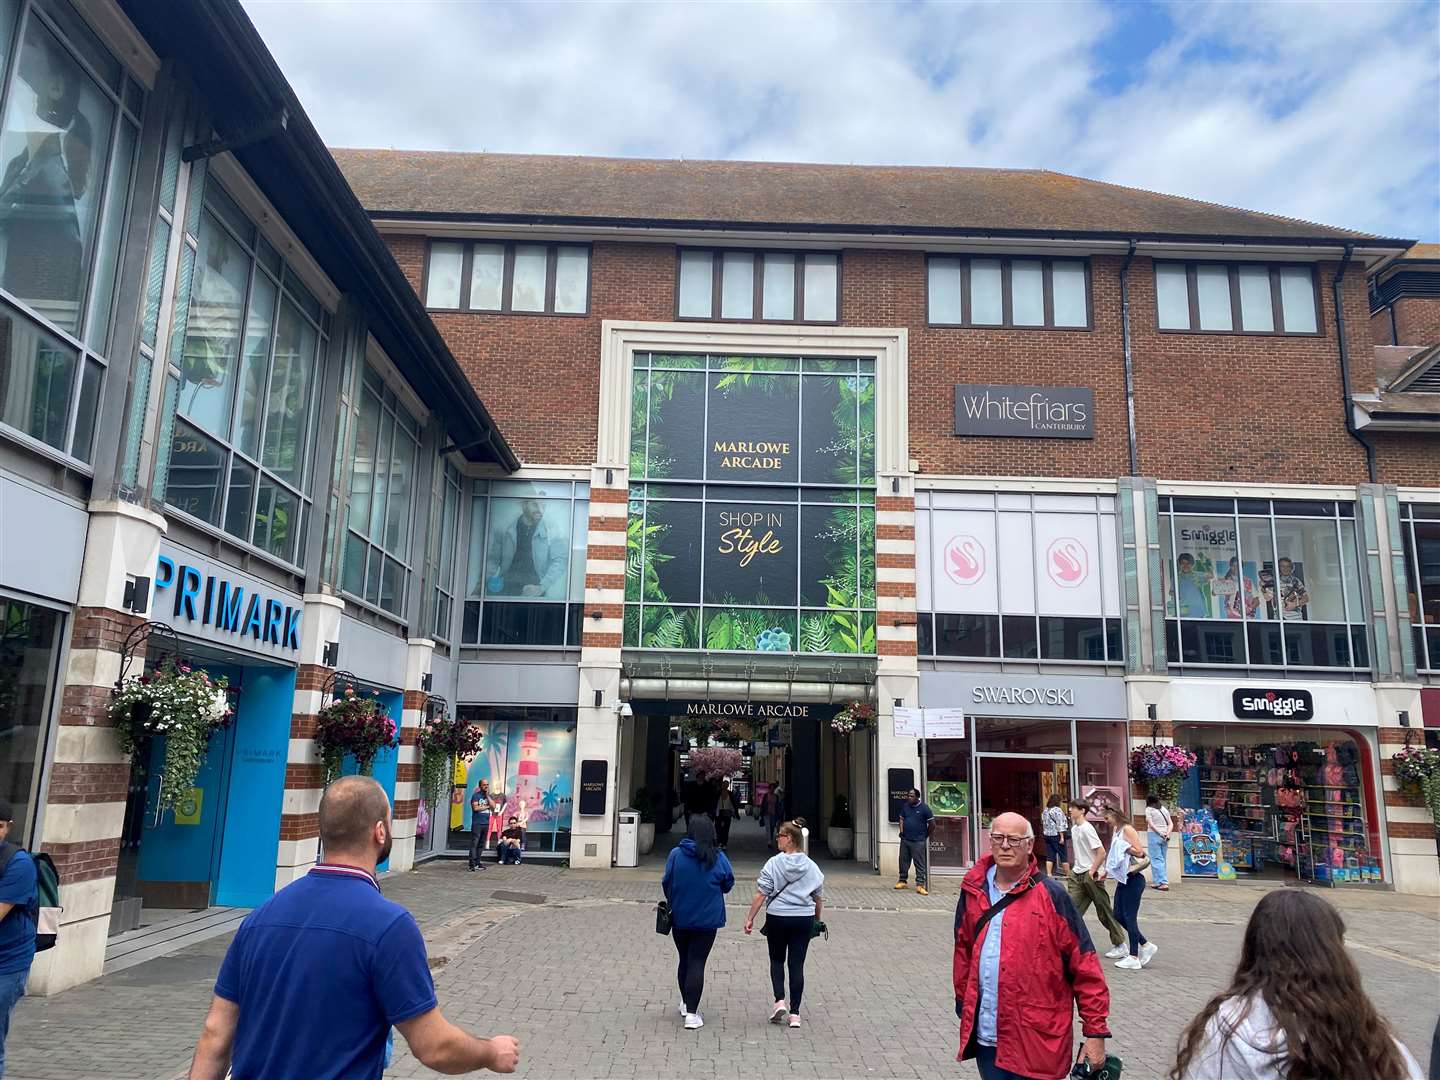 The Marlowe Arcade has not been fully occupied since 2019 but hopes are rising this could change in the near future